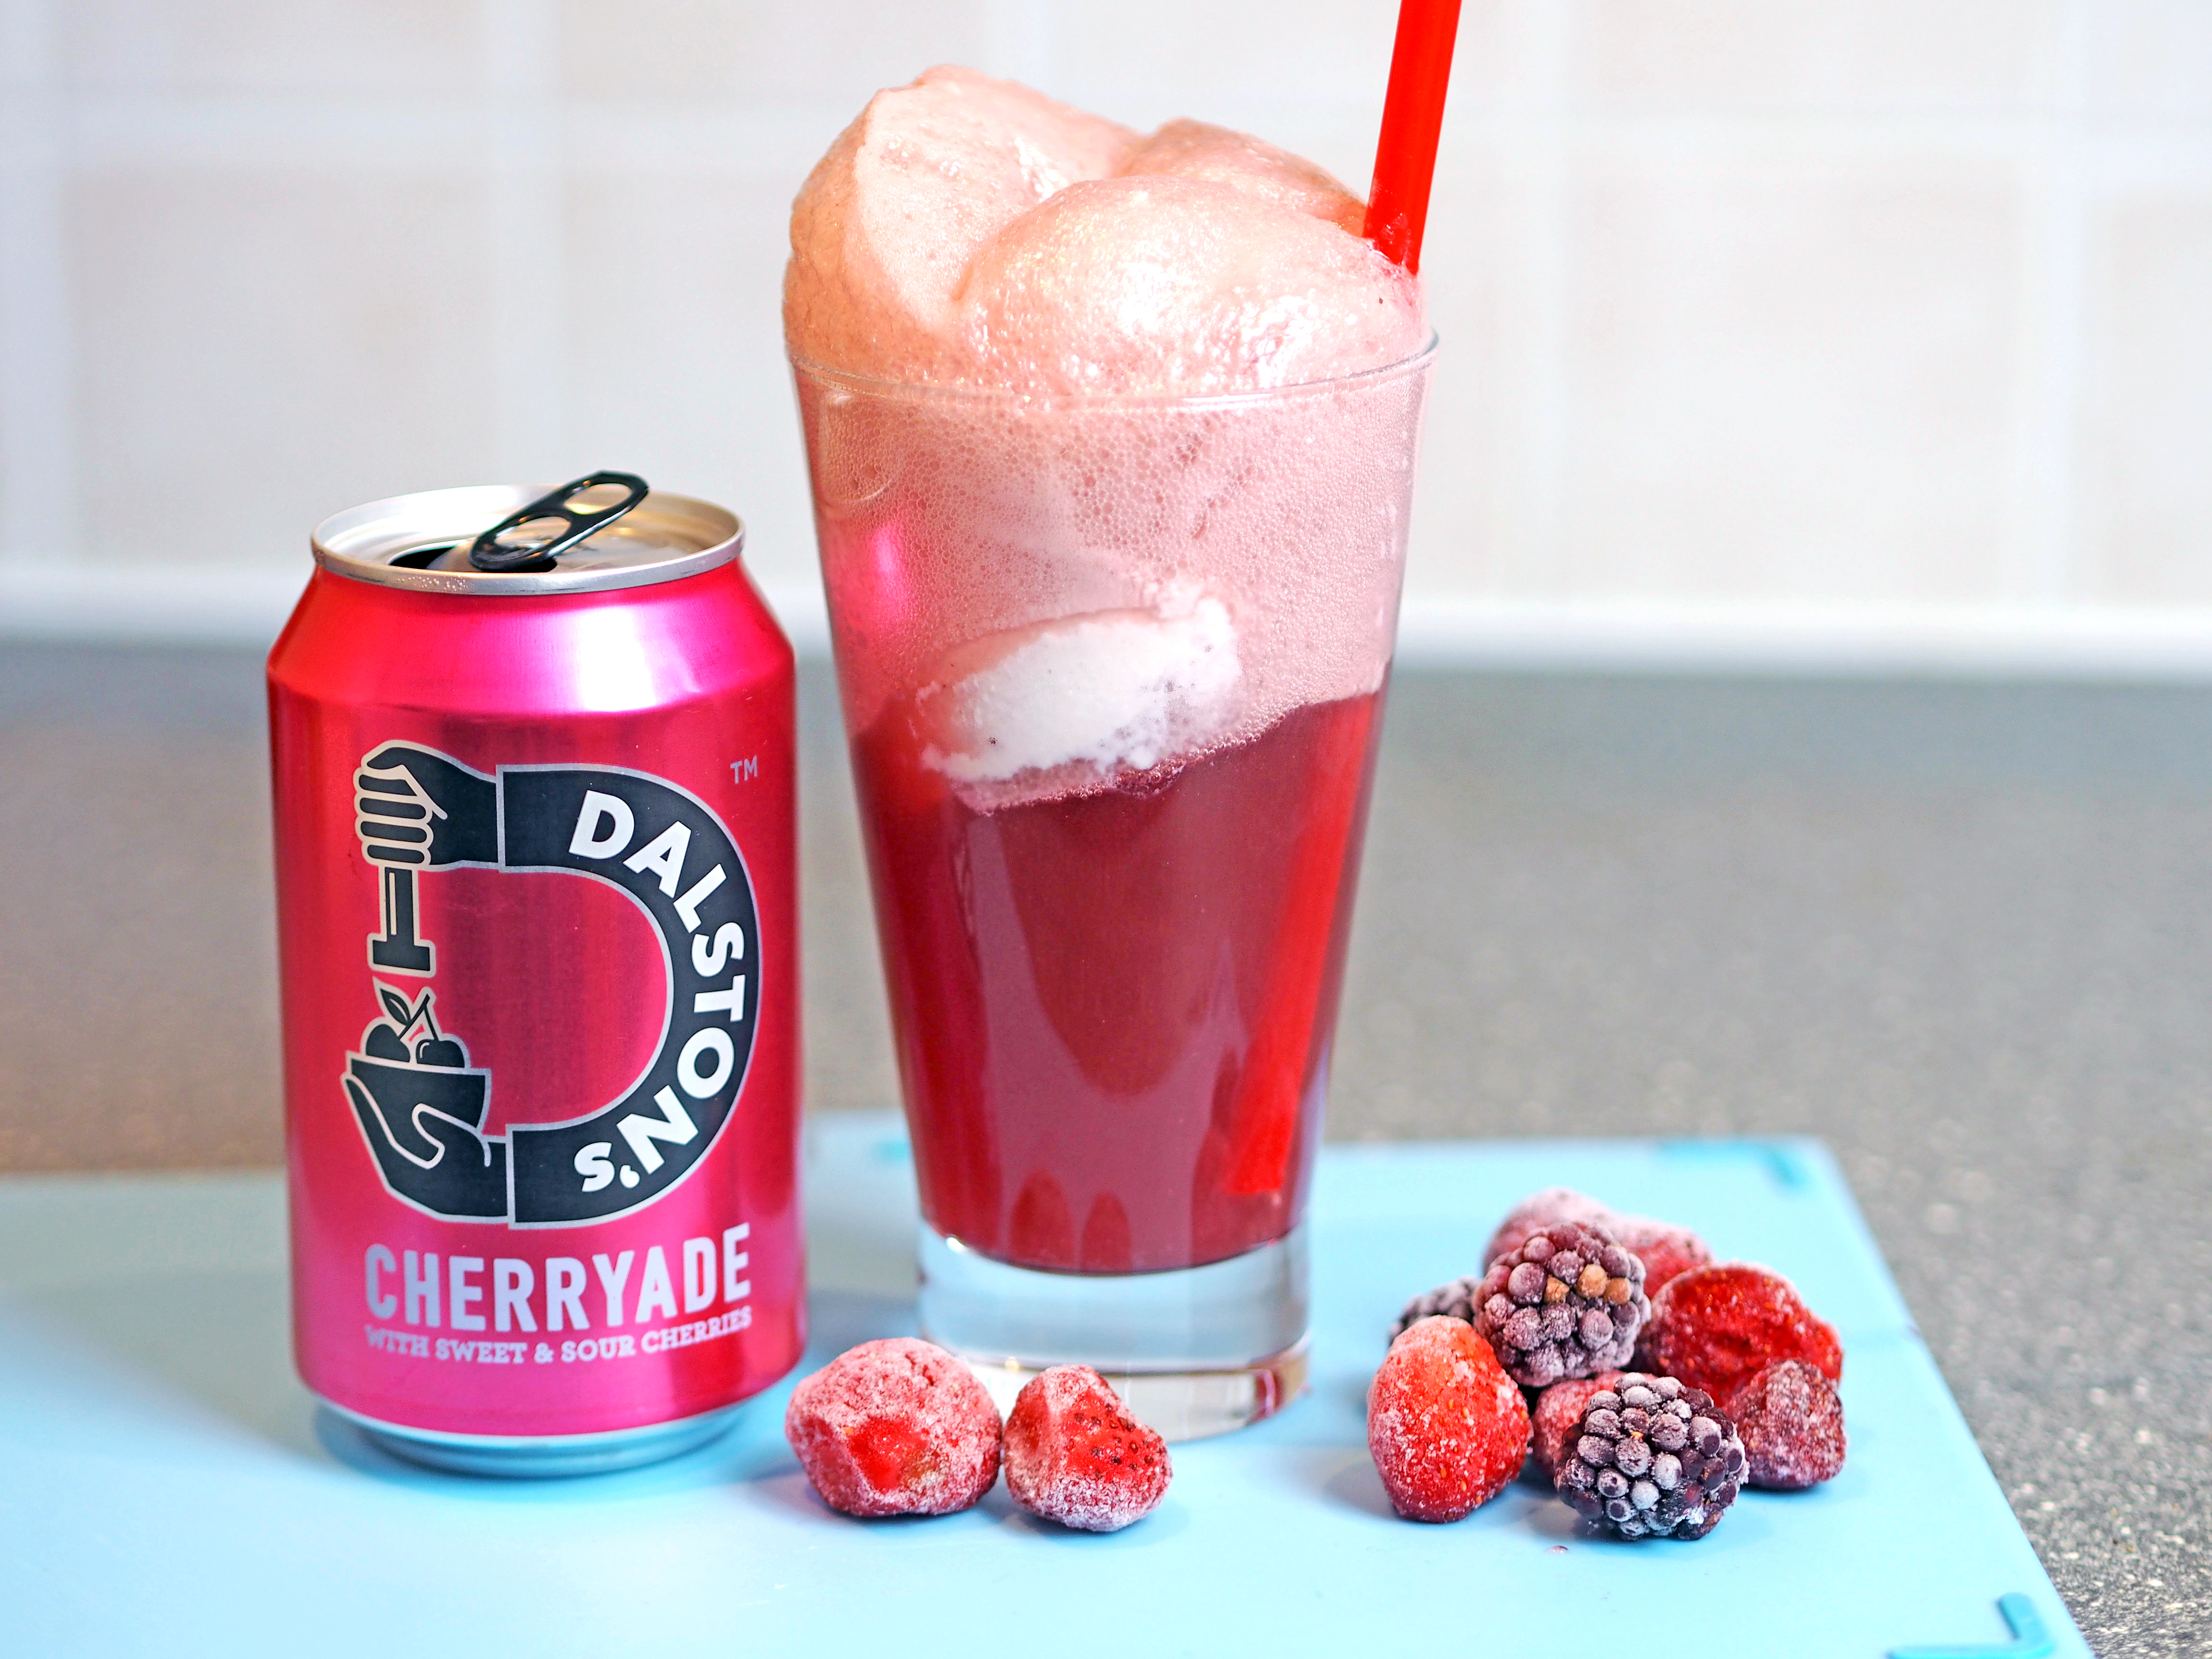 Laura Kate Lucas - Manchester Fashion, Lifestyle and Drinks Blogger | Dalstons Cherryade Review and Float Recipe